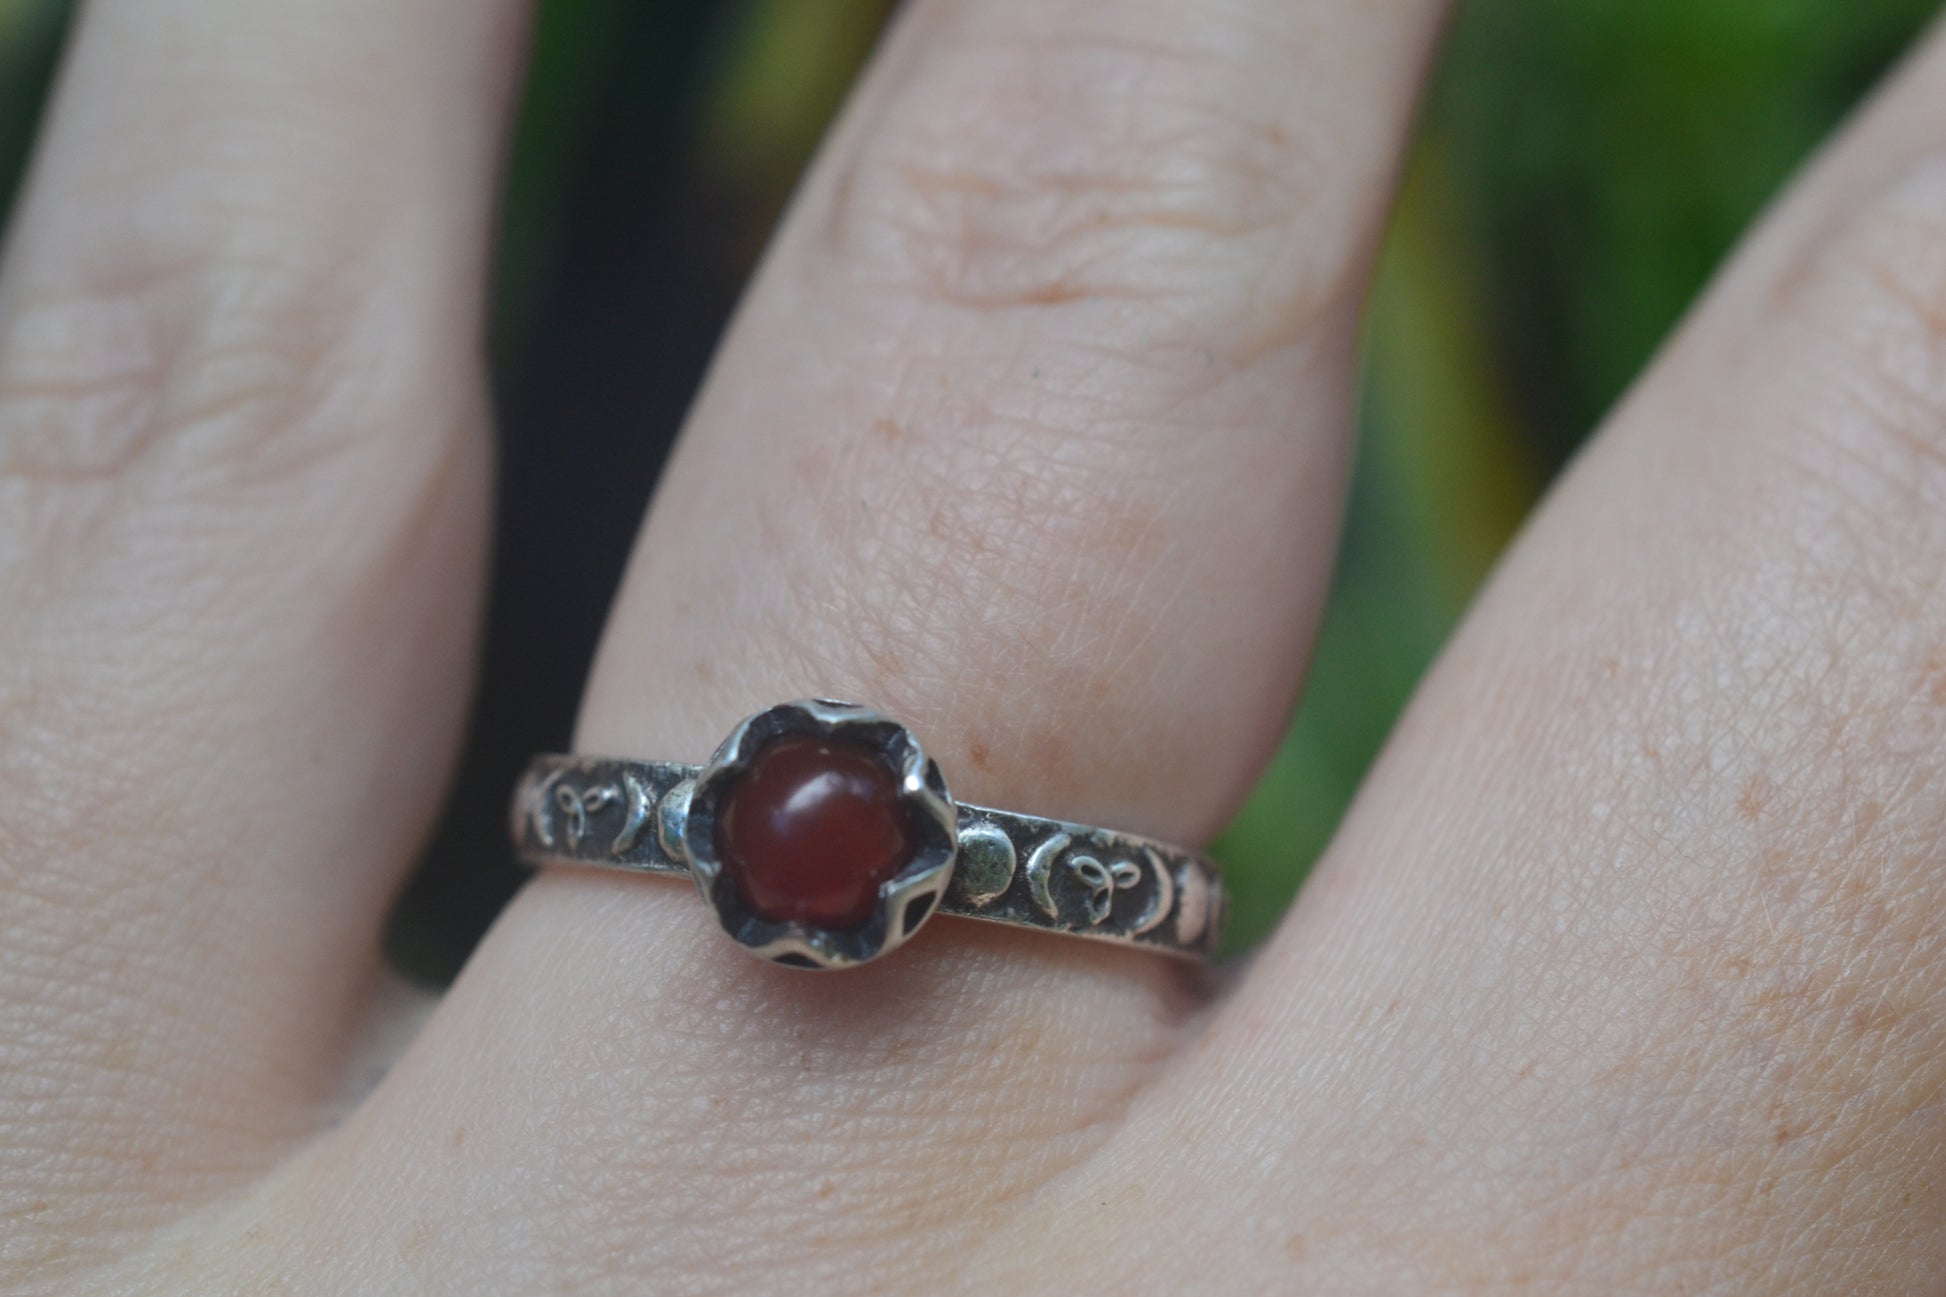 Pagan Triple Moon Goddess Ring With Red Gem